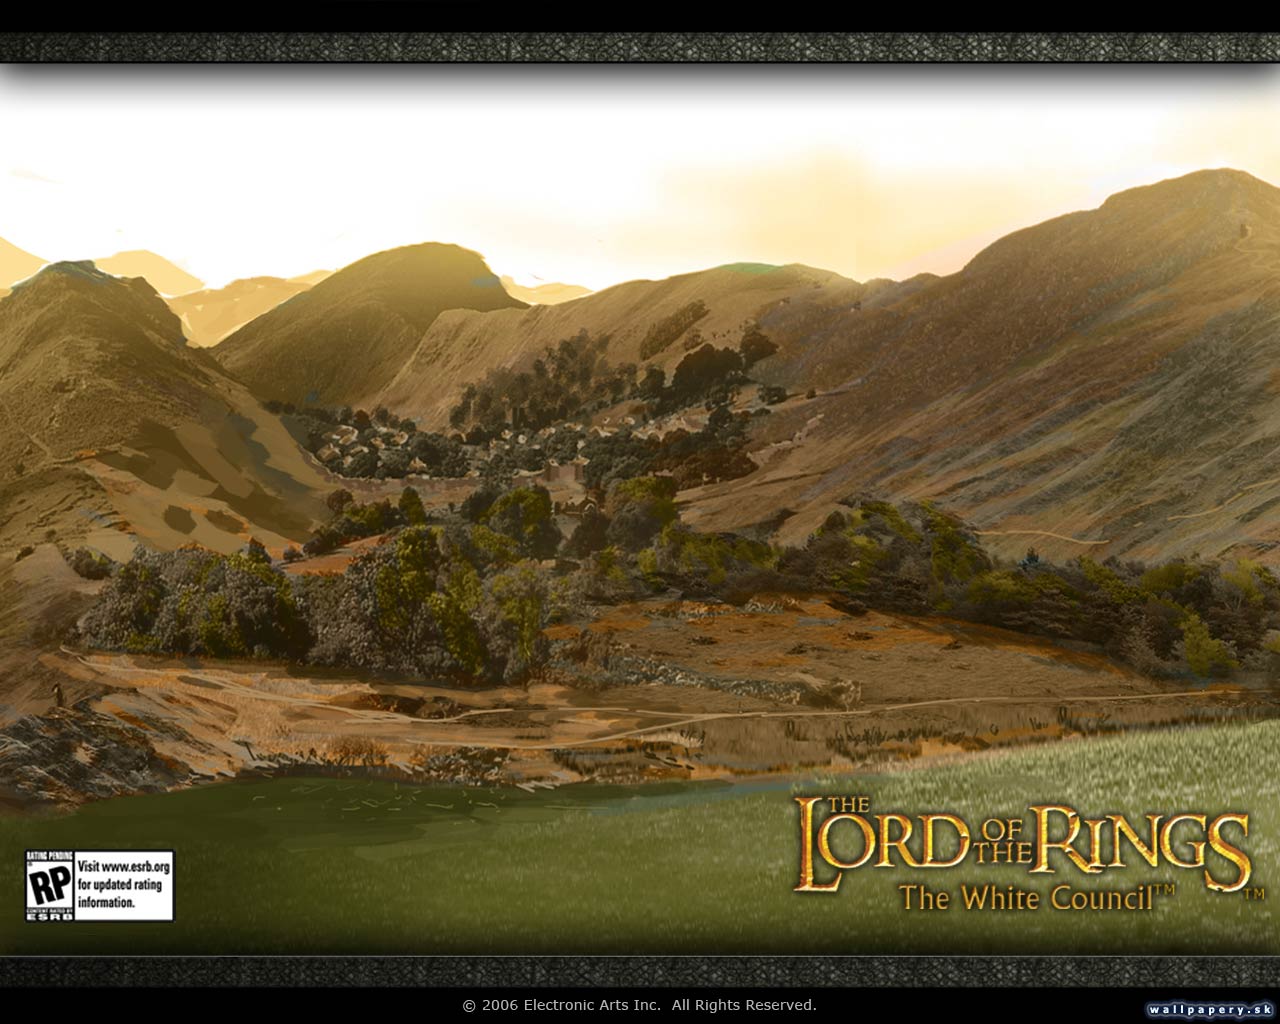 The Lord of the Rings: The White Council - wallpaper 9